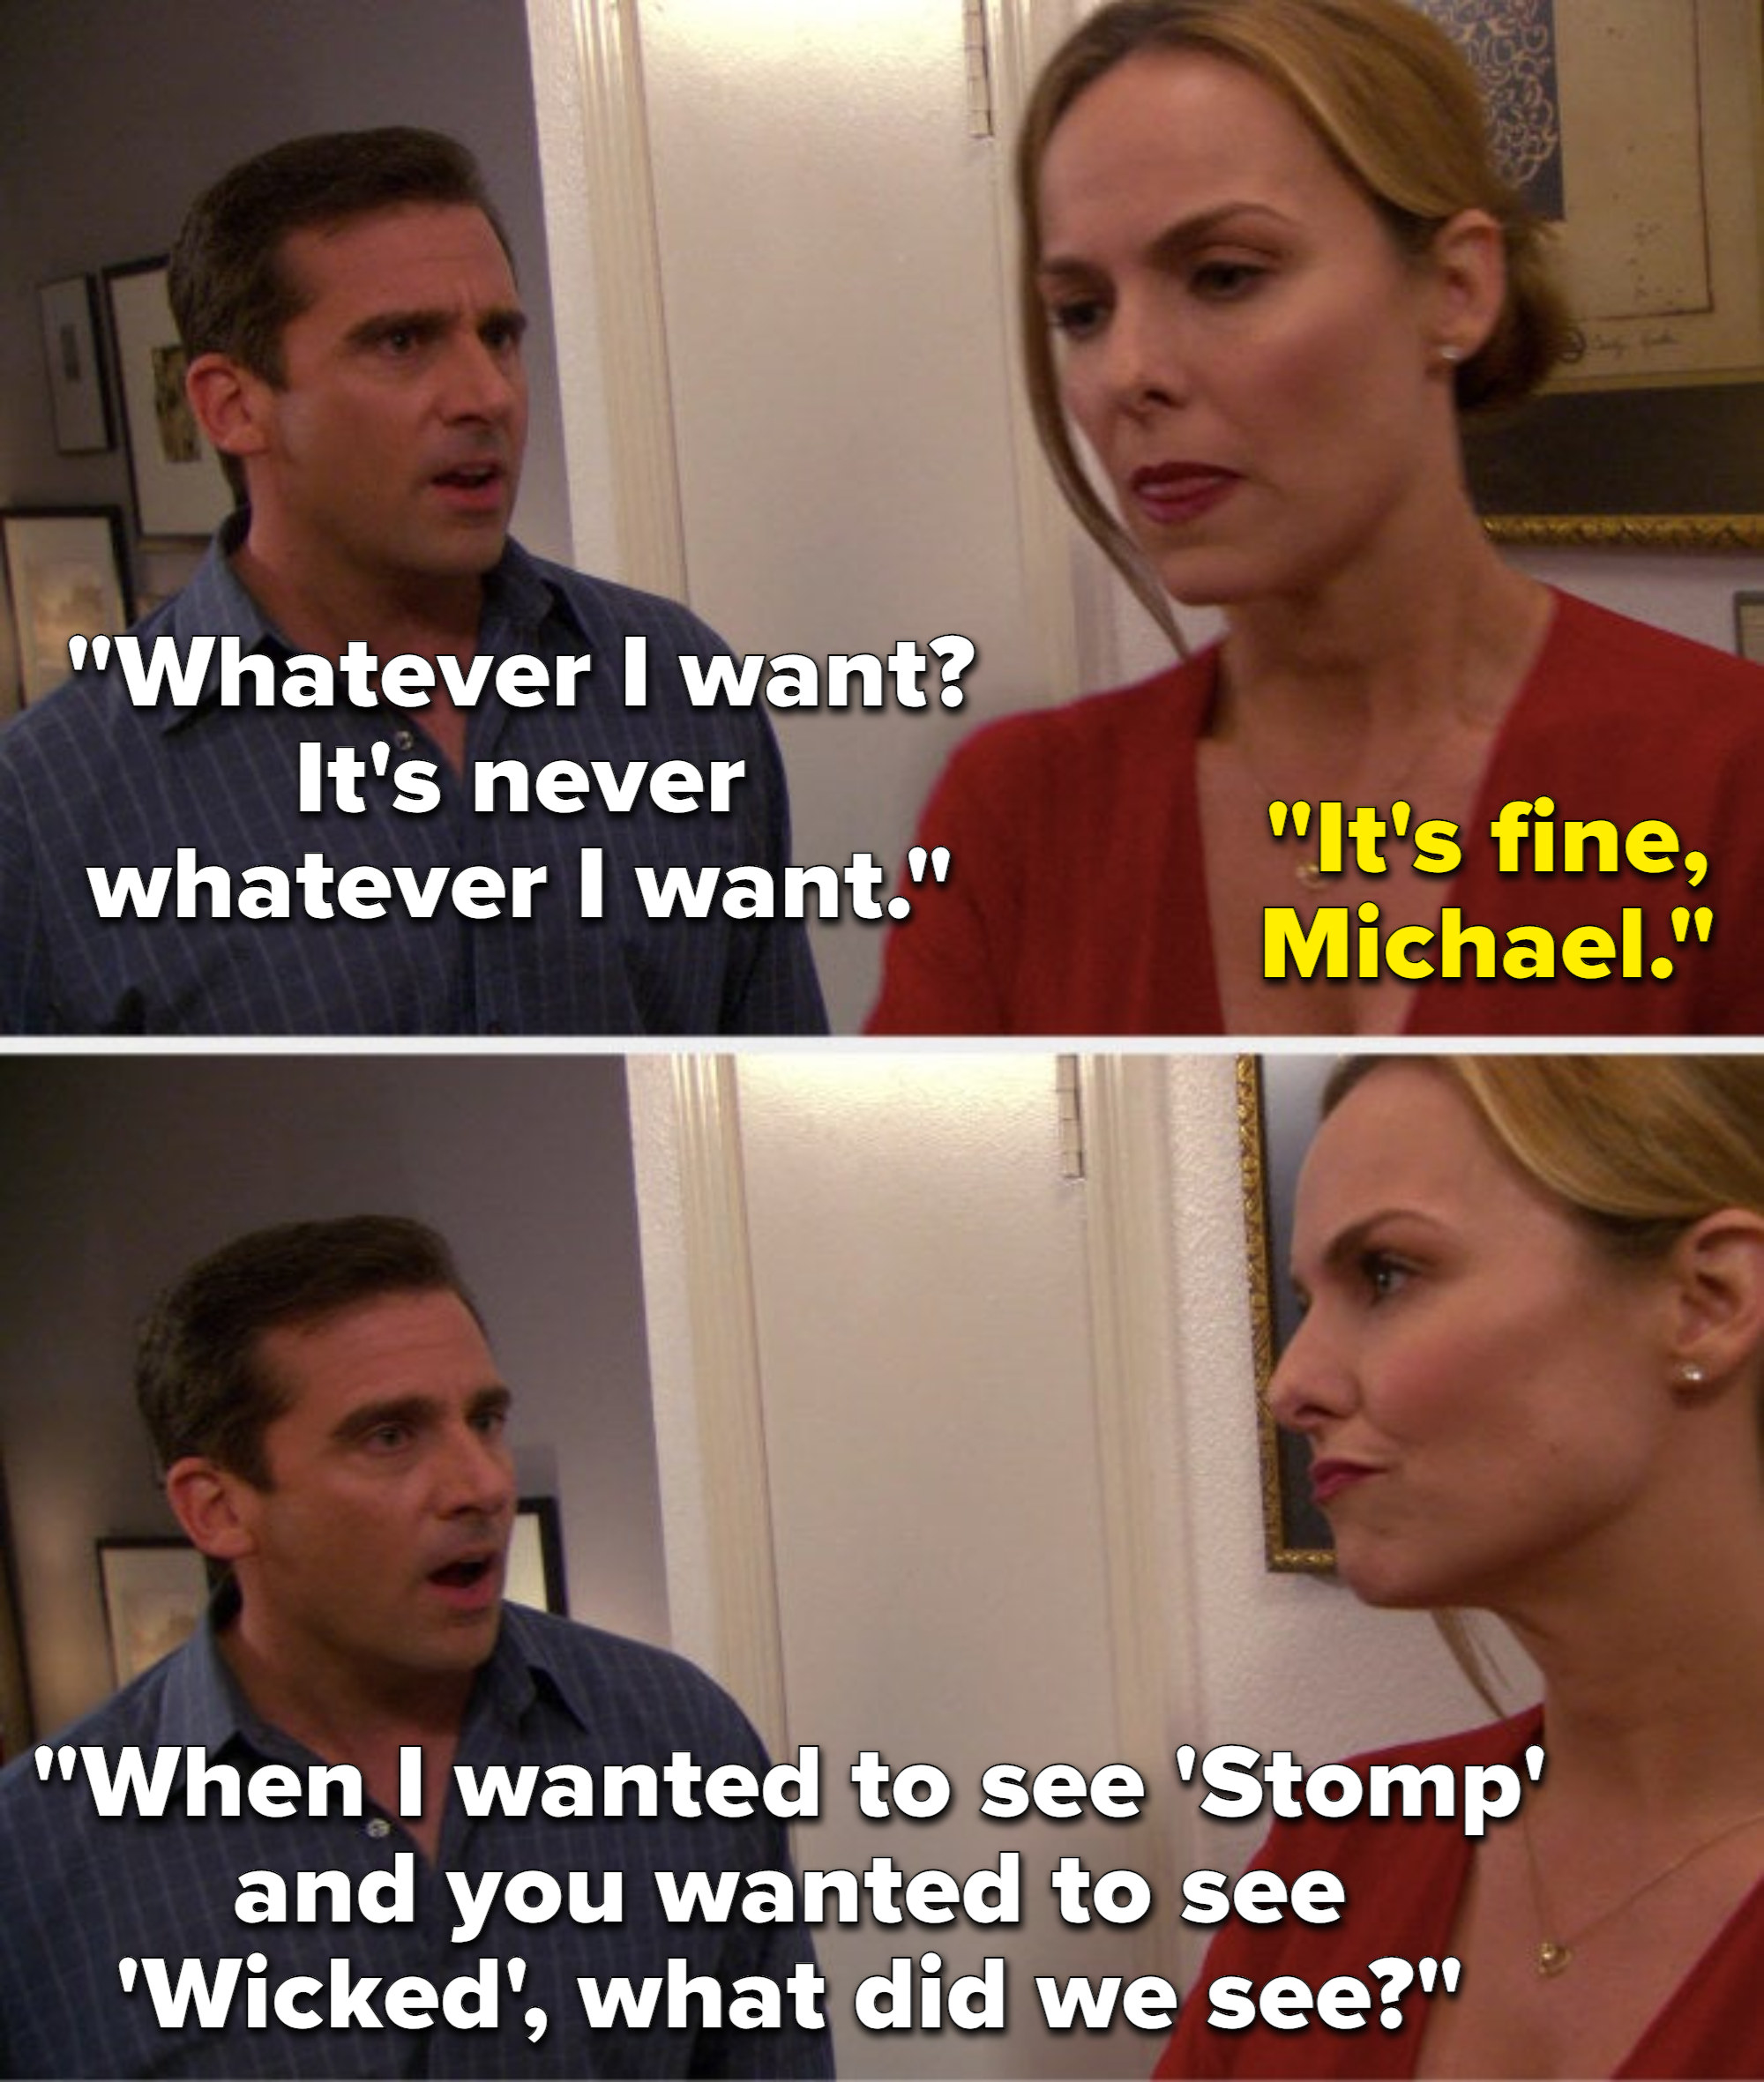 Michael says, It&#x27;s never whatever I want, Jan says, It&#x27;s fine, Michael, and Michael says, When I wanted to see Stomp and you wanted to see Wicked, what did we see